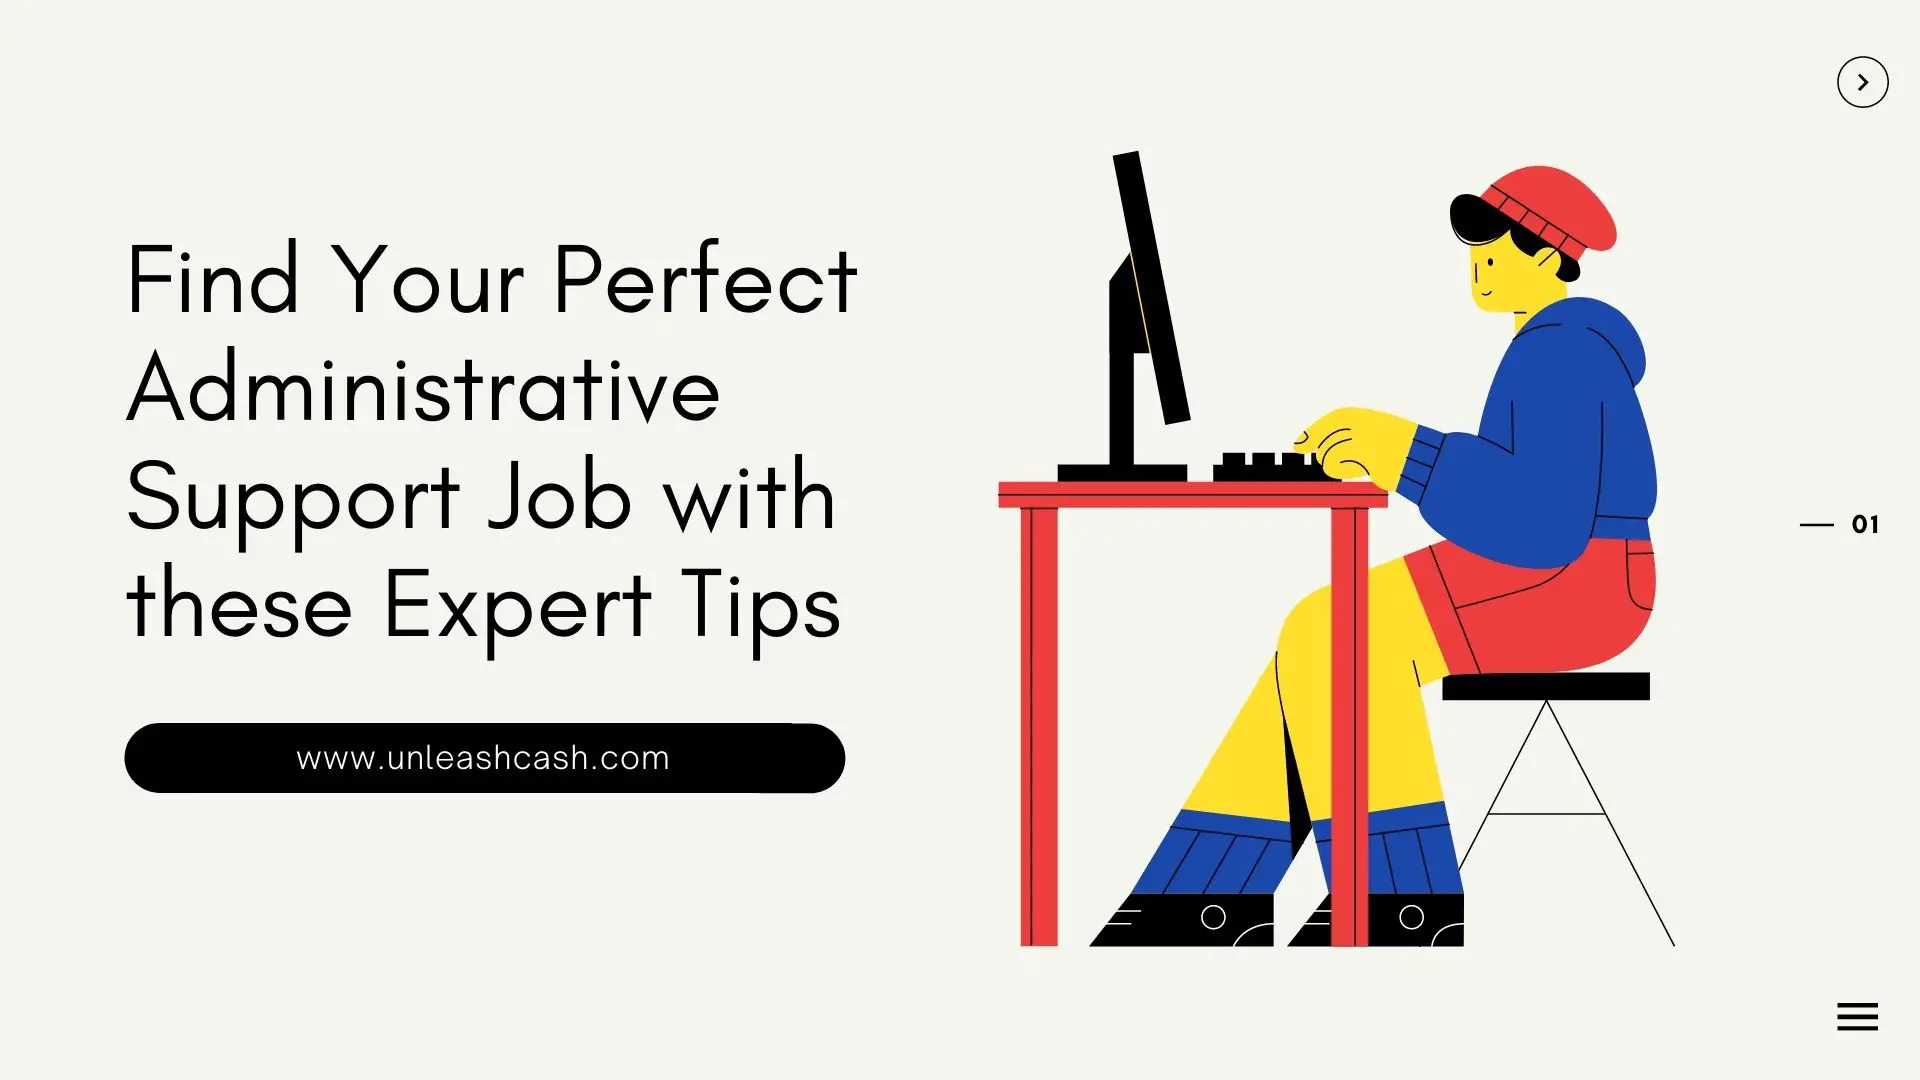 Find Your Perfect Administrative Support Job with these Expert Tips